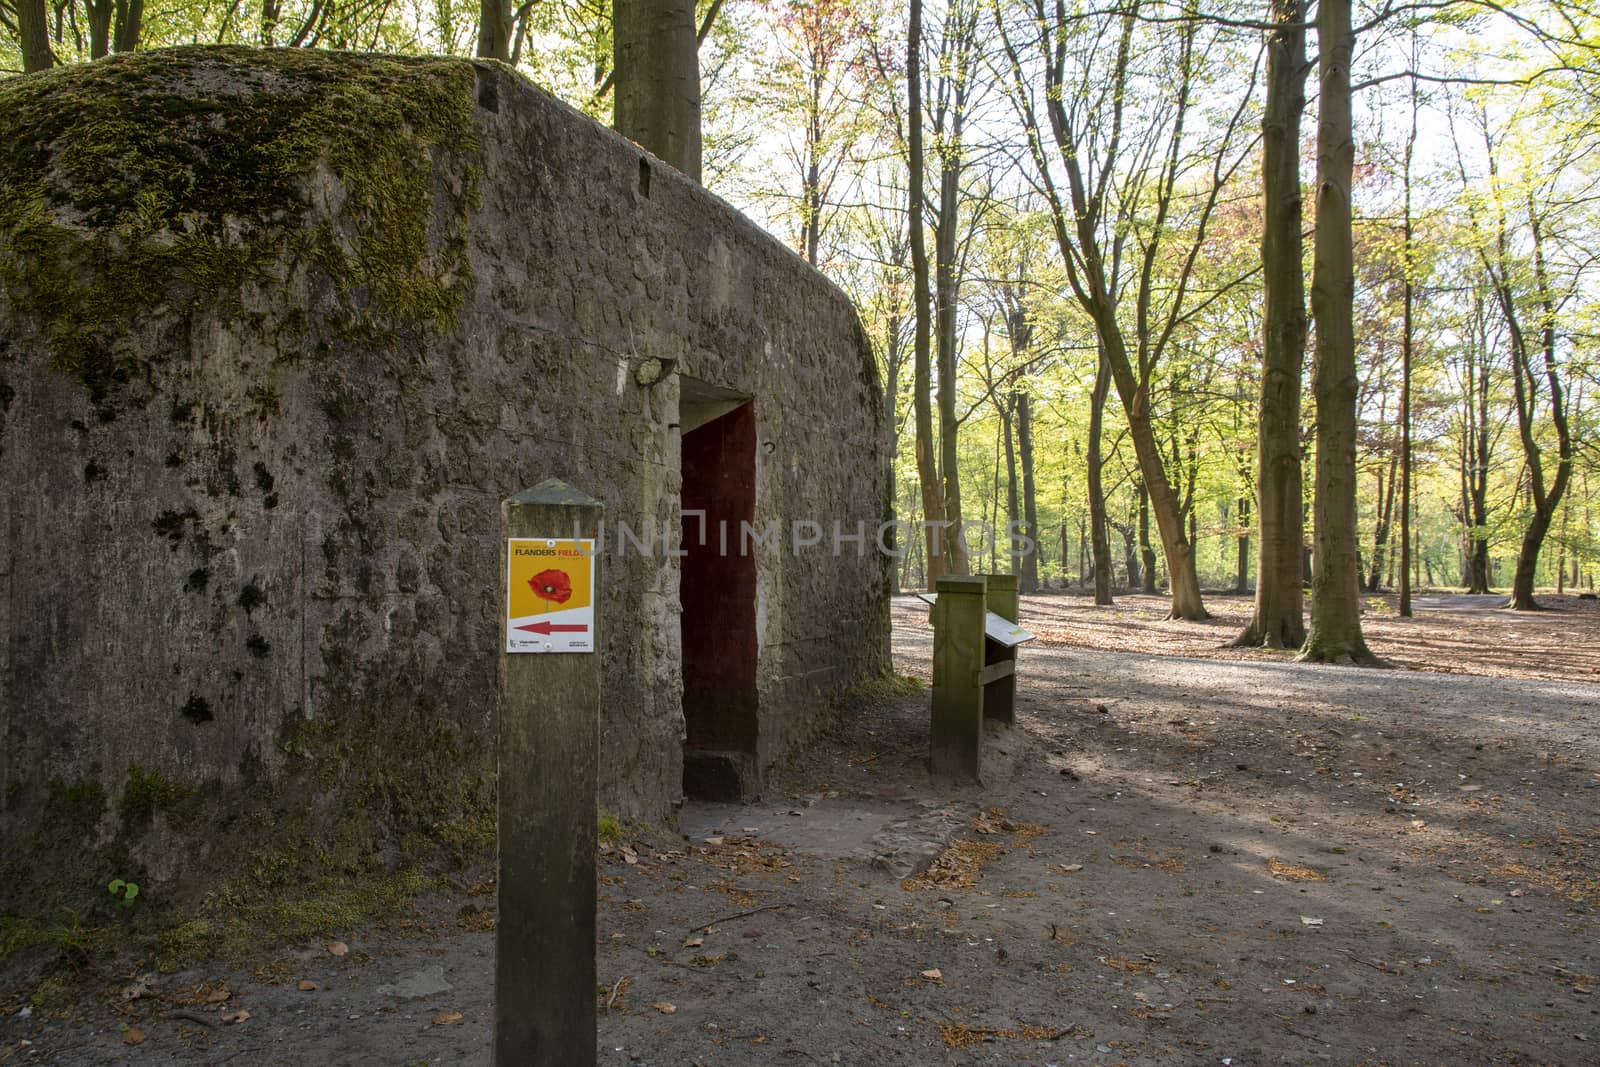 German WW1 bunker located in Mastenbos on the historical Flanders Fields site by kb79